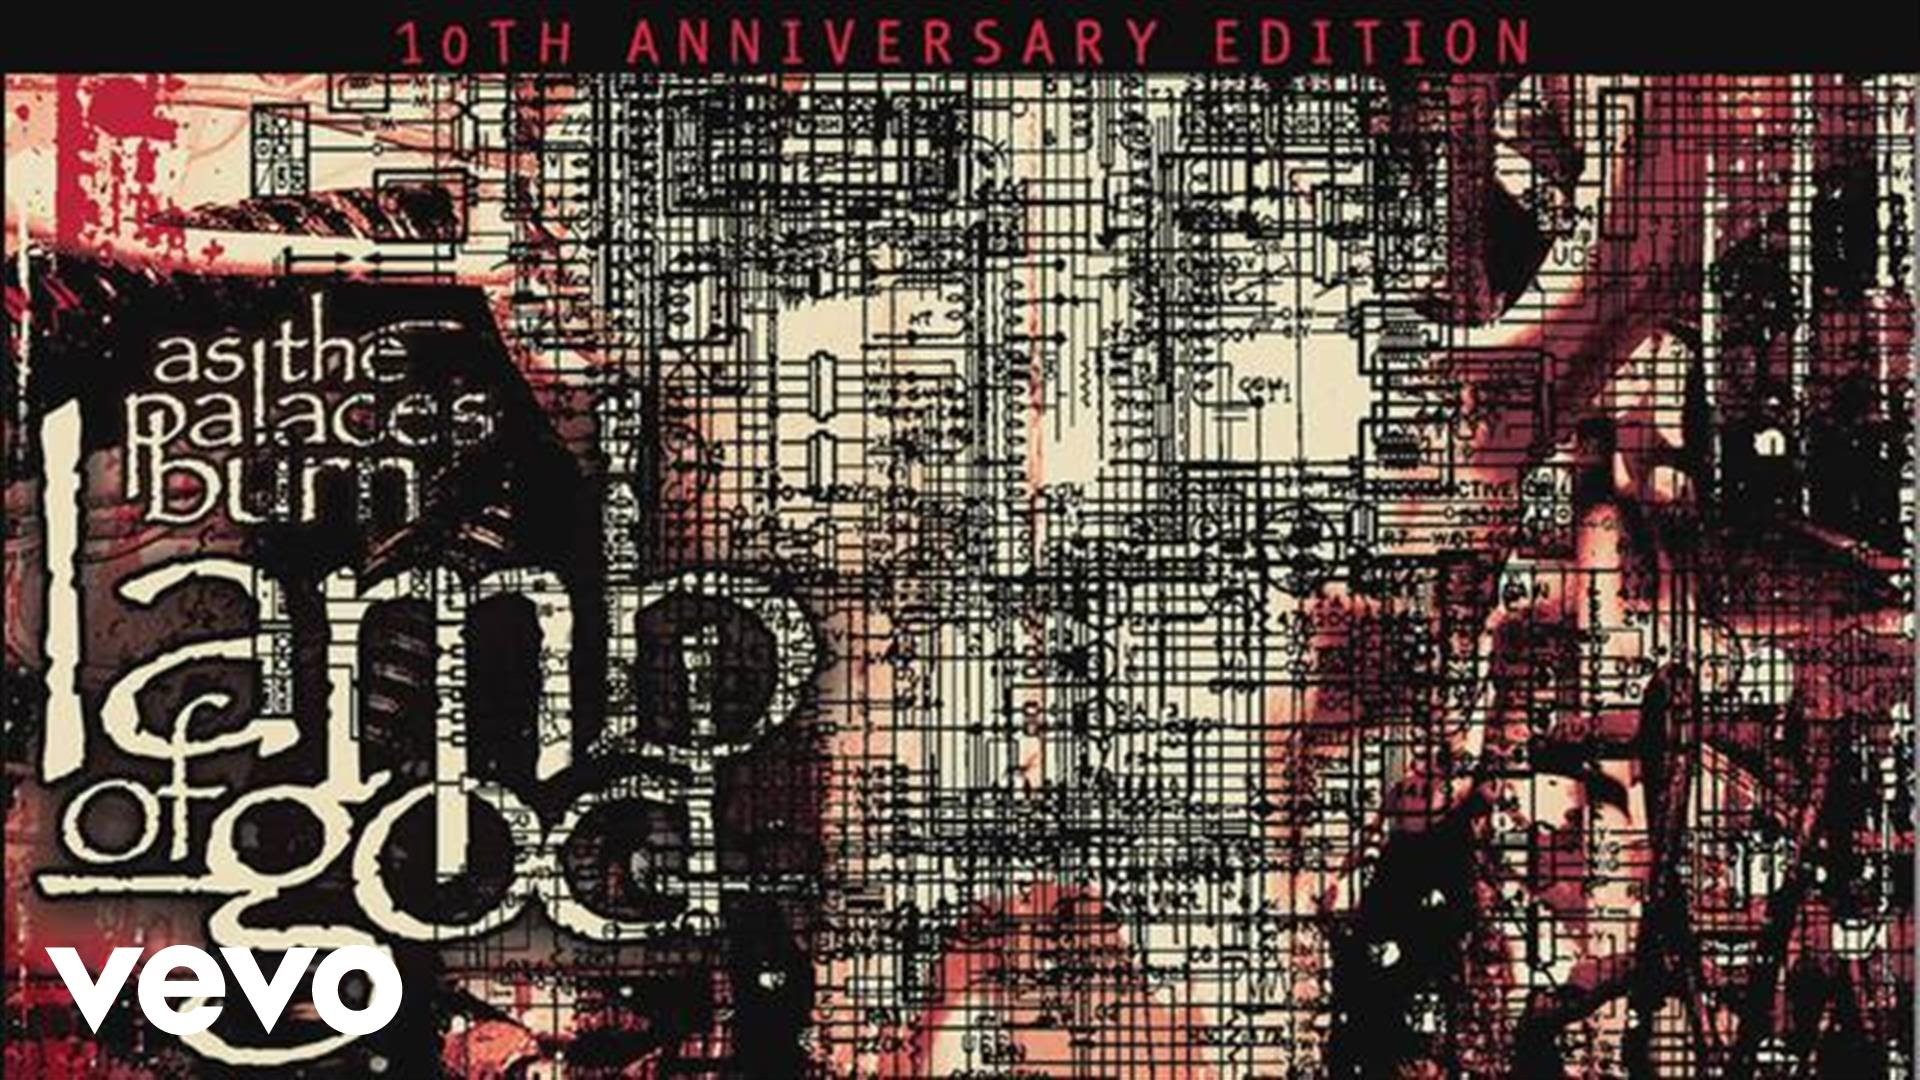 1920x1080 Lamb of God - As The Palaces Burn 10th Anniversary Edition trailer - YouTube